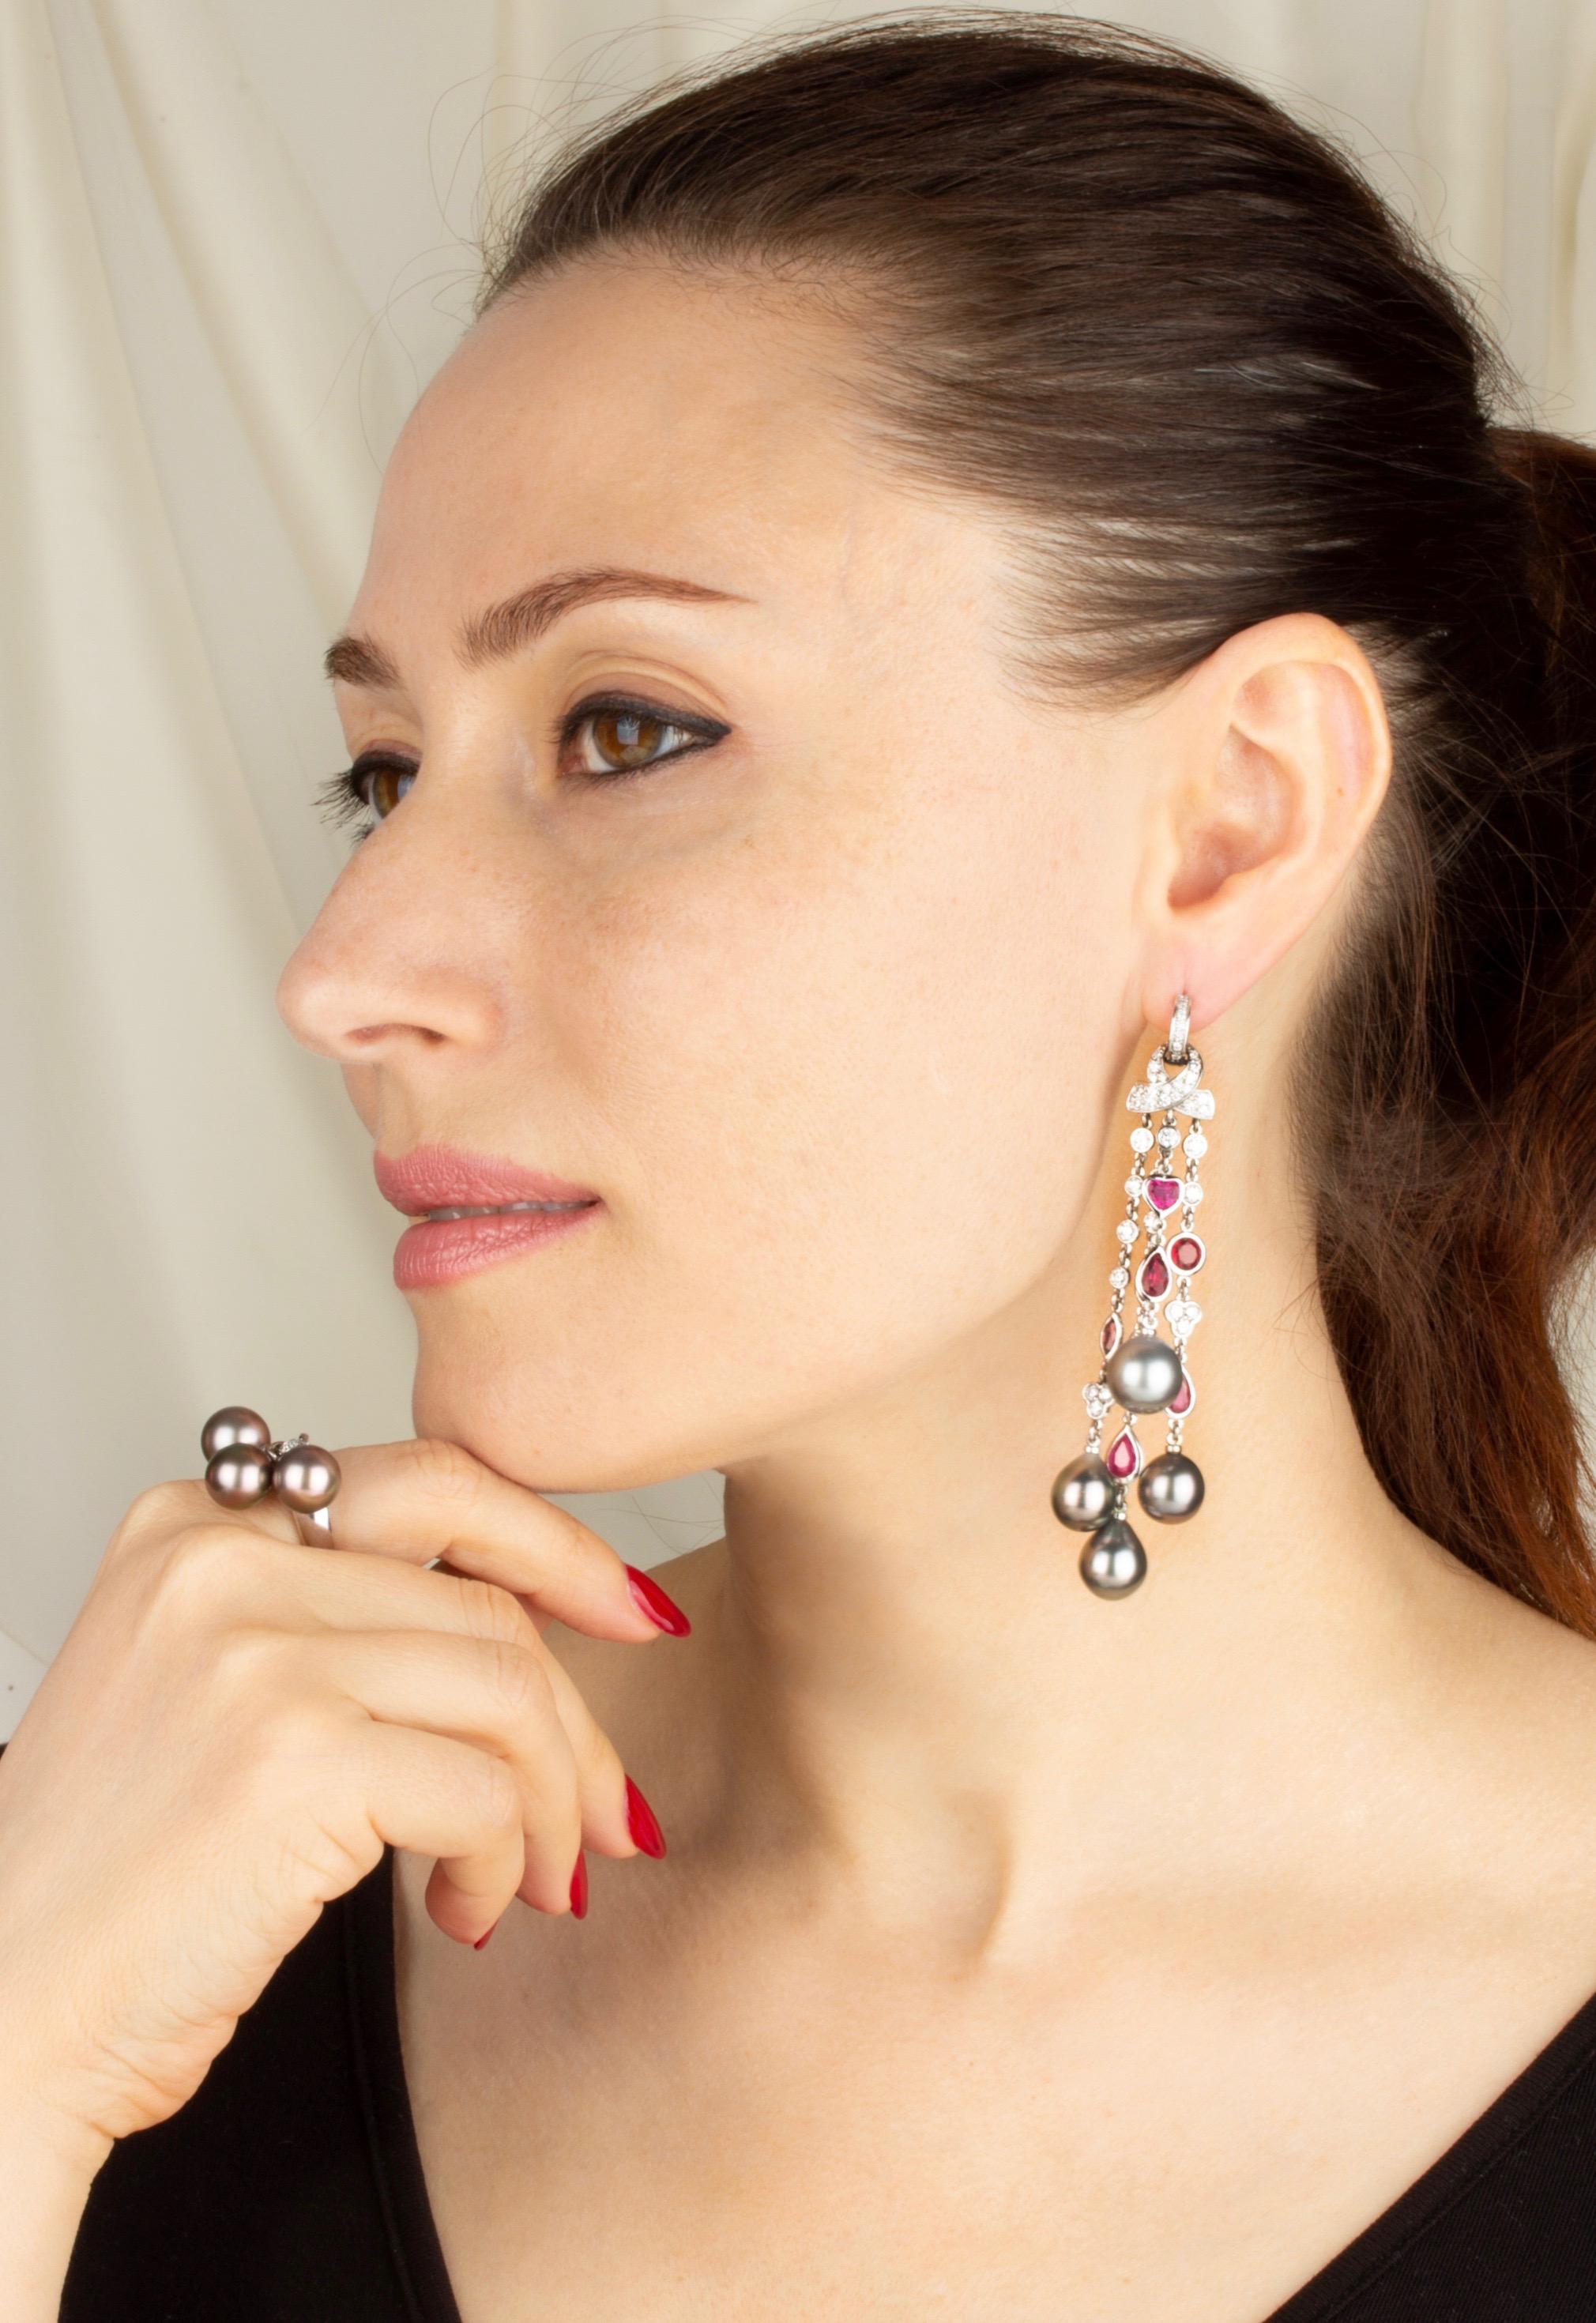 The diamond, ruby and pearl chandelier earrings feature a cascade with 8 South Sea pearls of 12/11mm diameter. The untreated Tahitian pearls display a beautiful nacre and their natural color and high luster have not been enhanced in any way.
The